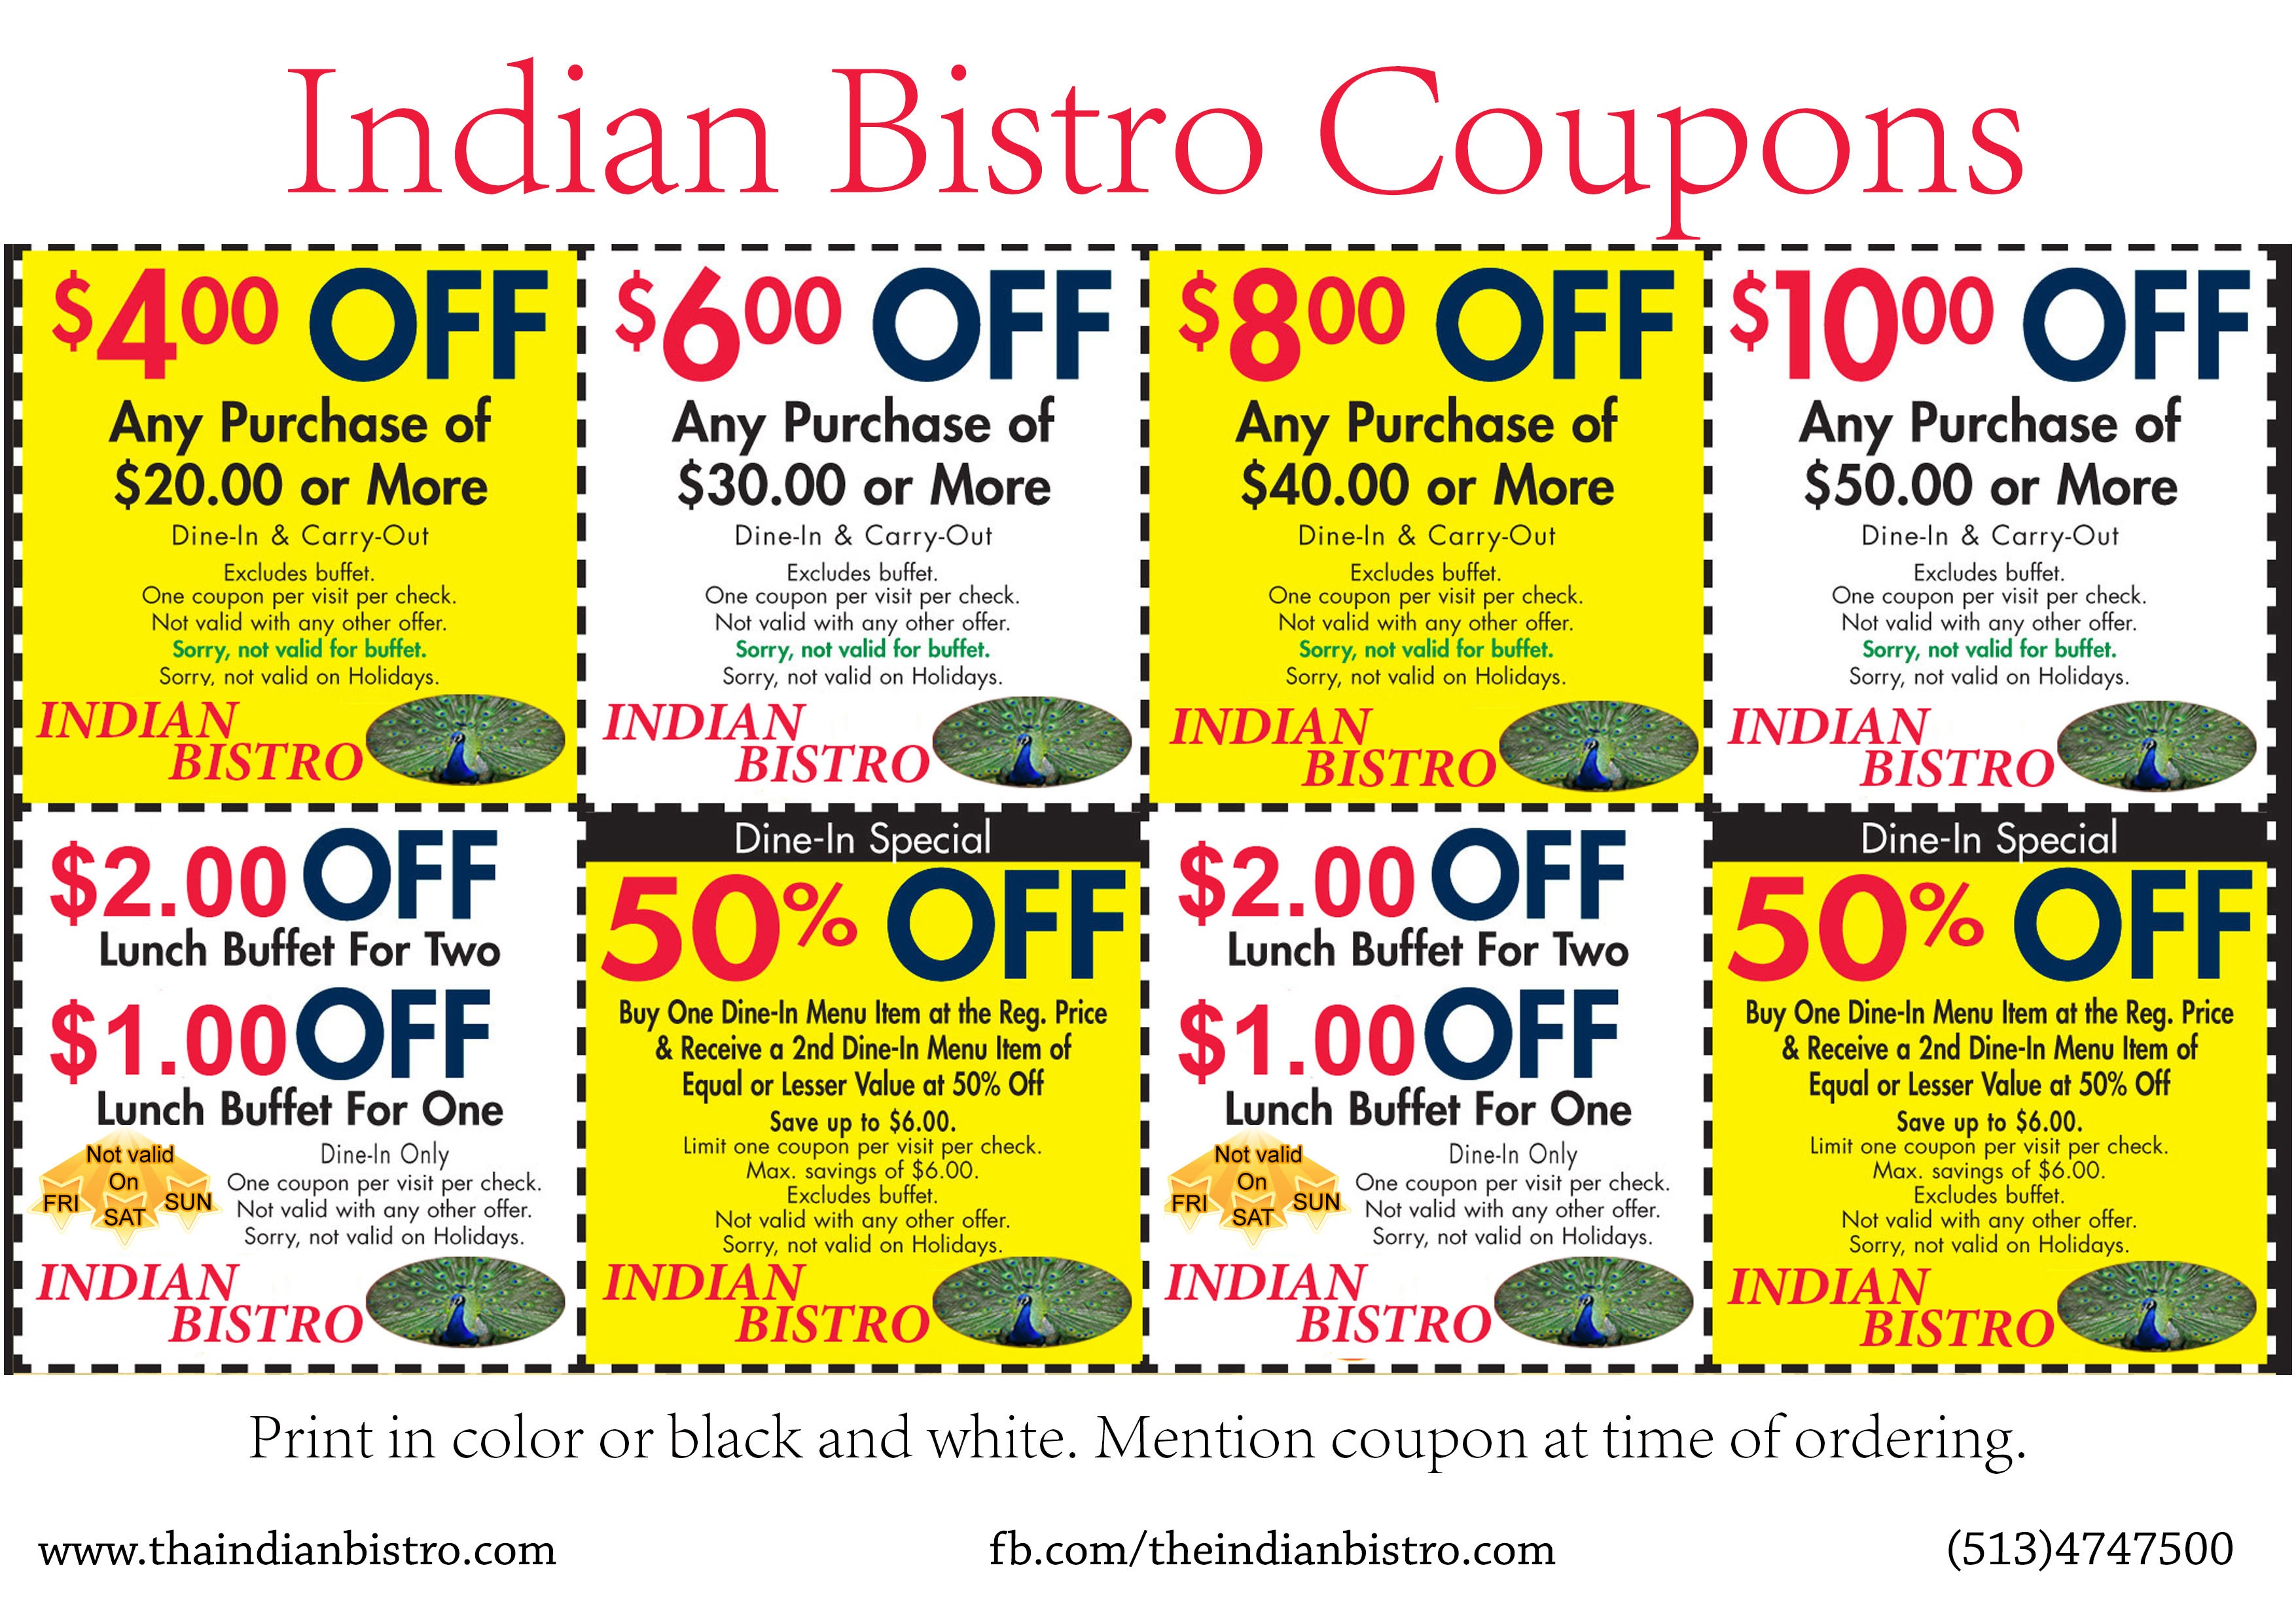 Old Country Buffet Printable Coupons Buy One Get One Free (79+ - Old Country Buffet Printable Coupons Buy One Get One Free